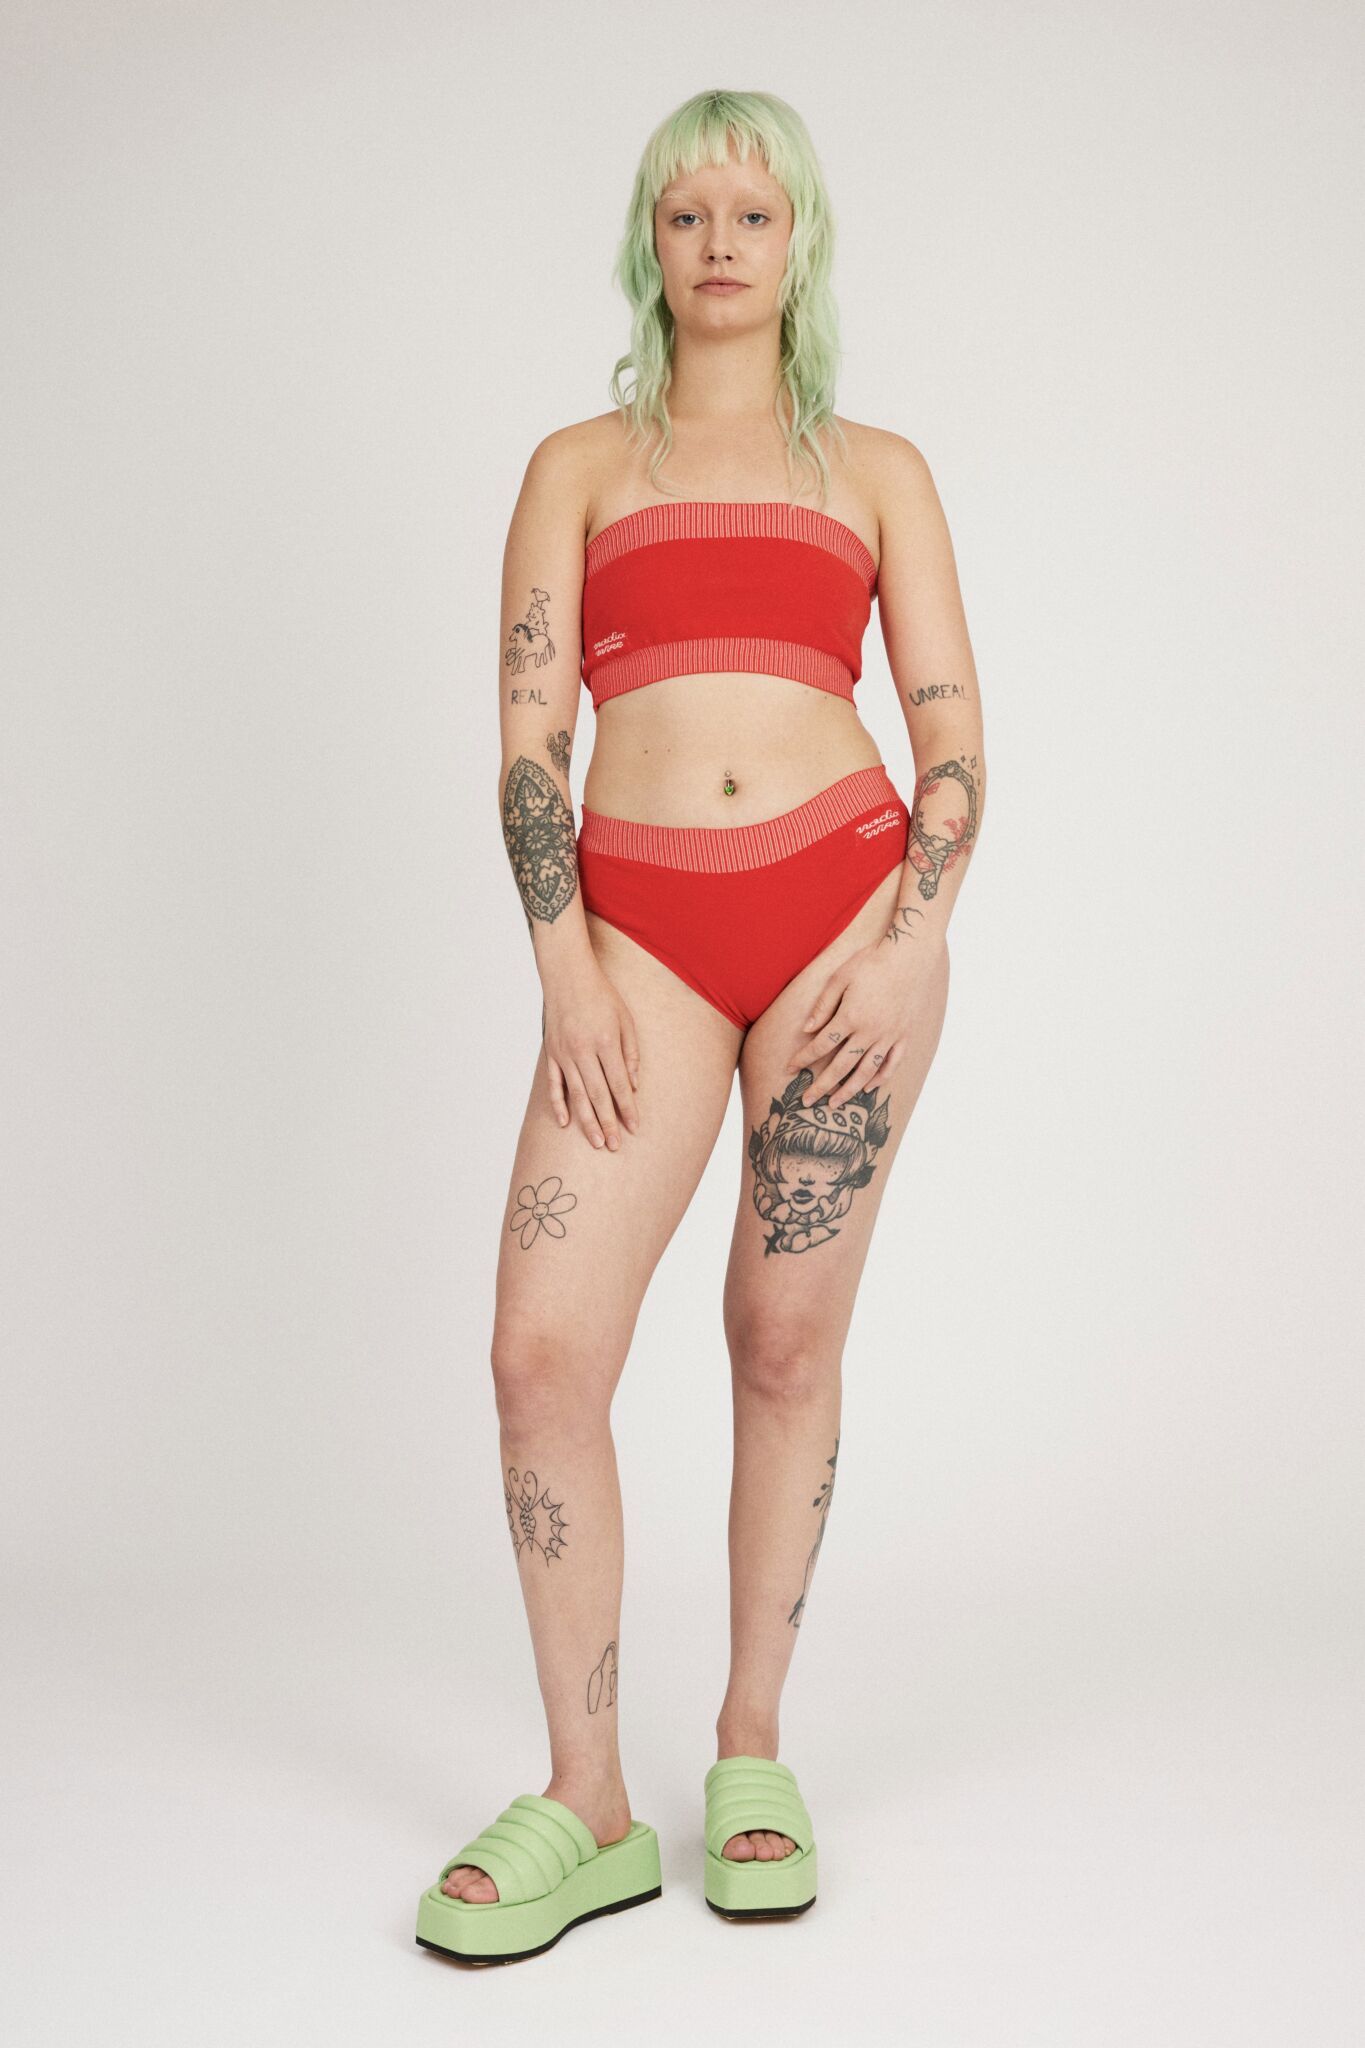 Spring Bloomer Panty in red and pink are a knitted pair of high-waist pantys with logo and ribbed edges. Knitted in a body fitted, yet flexible material that adapts to the body. Can be mixed and matched with Spring Bloomer Top and be used as swimwear.